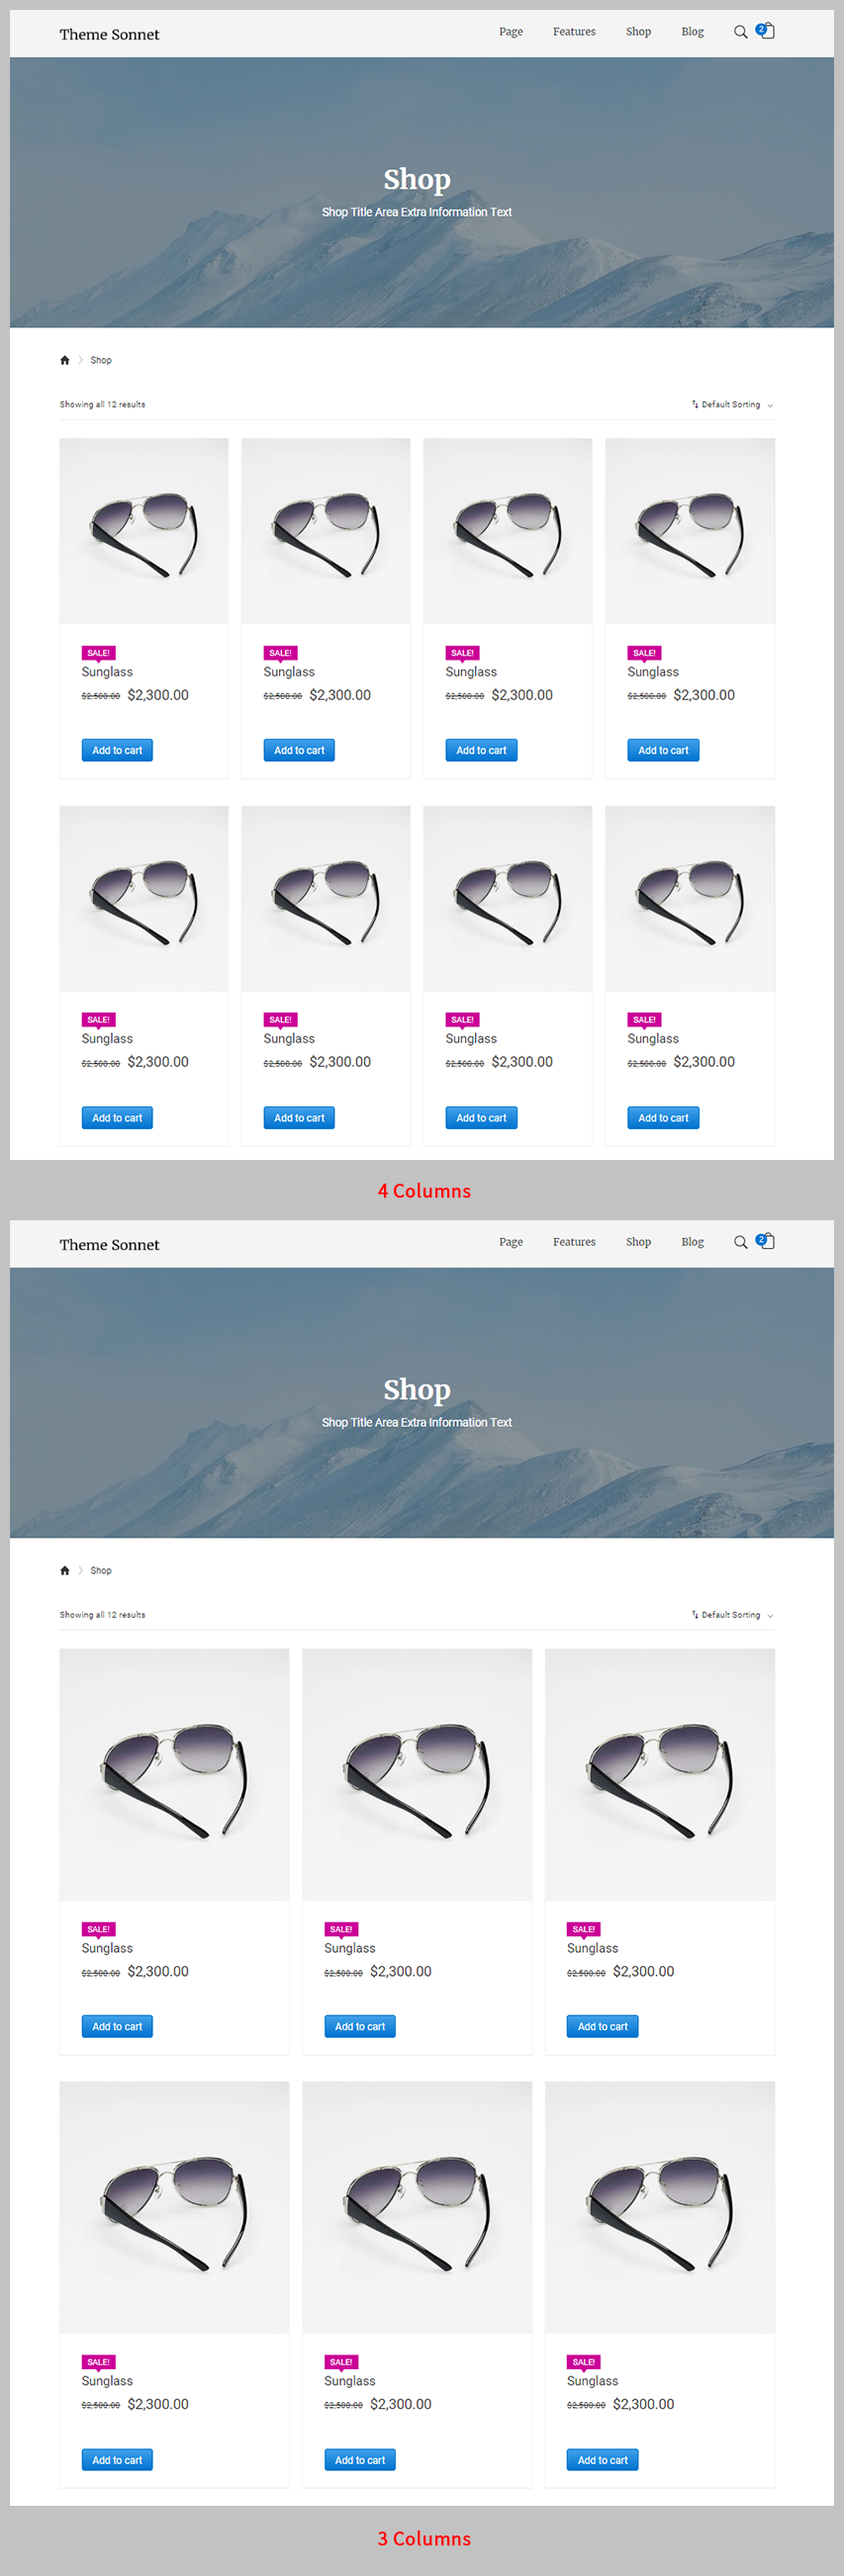 Number of Columns On The WooCommerce Shop Page.